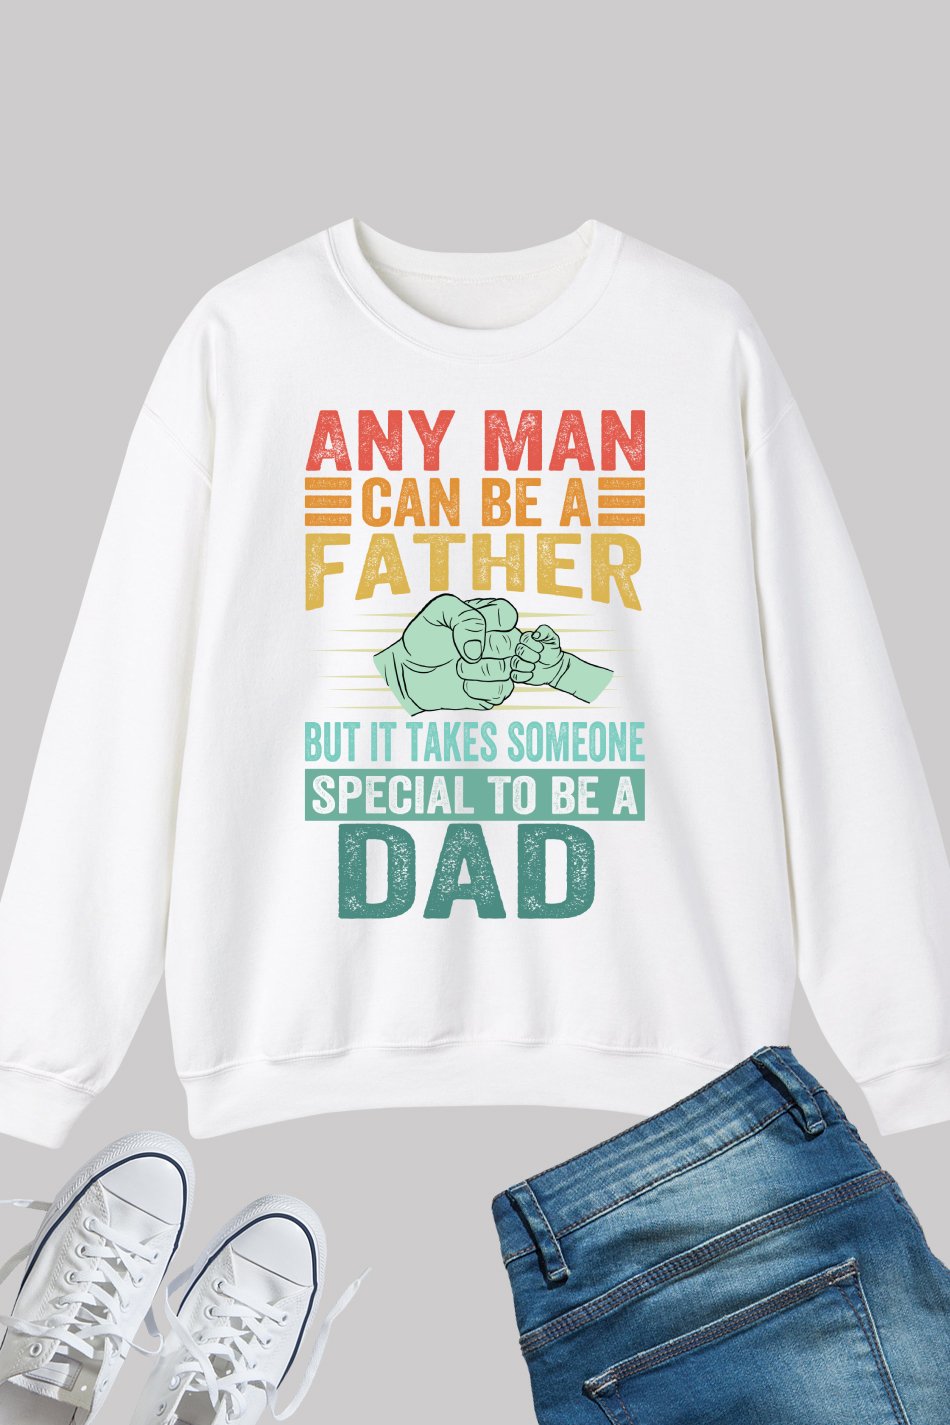 But It Takes Someone Special To Be A Dad Sweatshirt